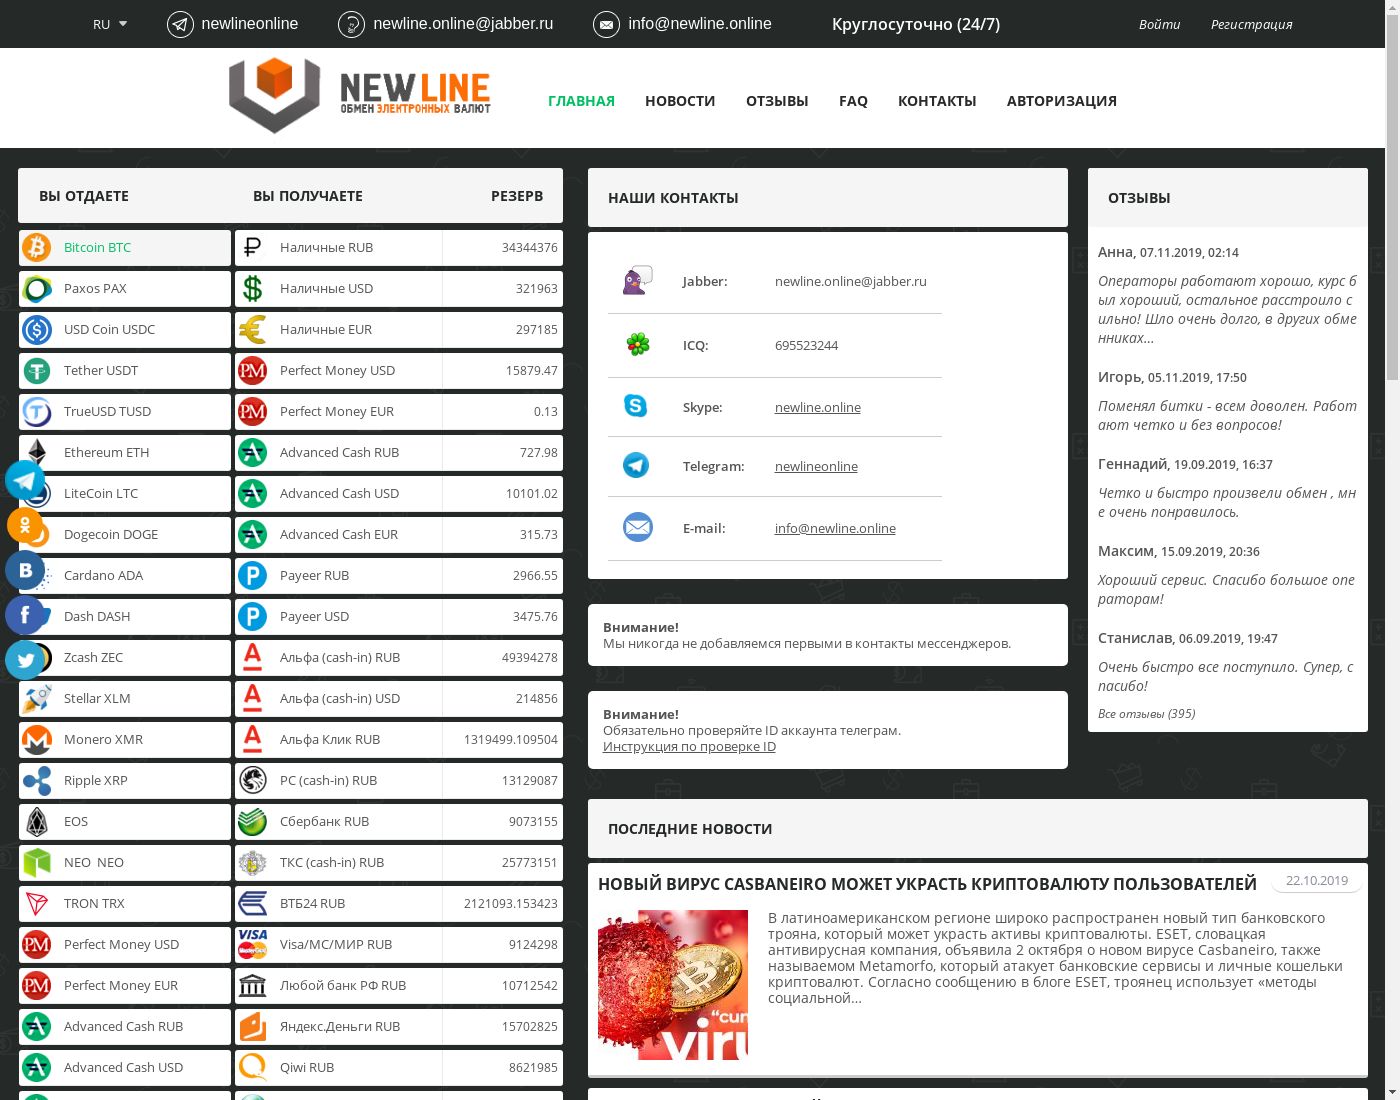 Newline user interface: the home page in English